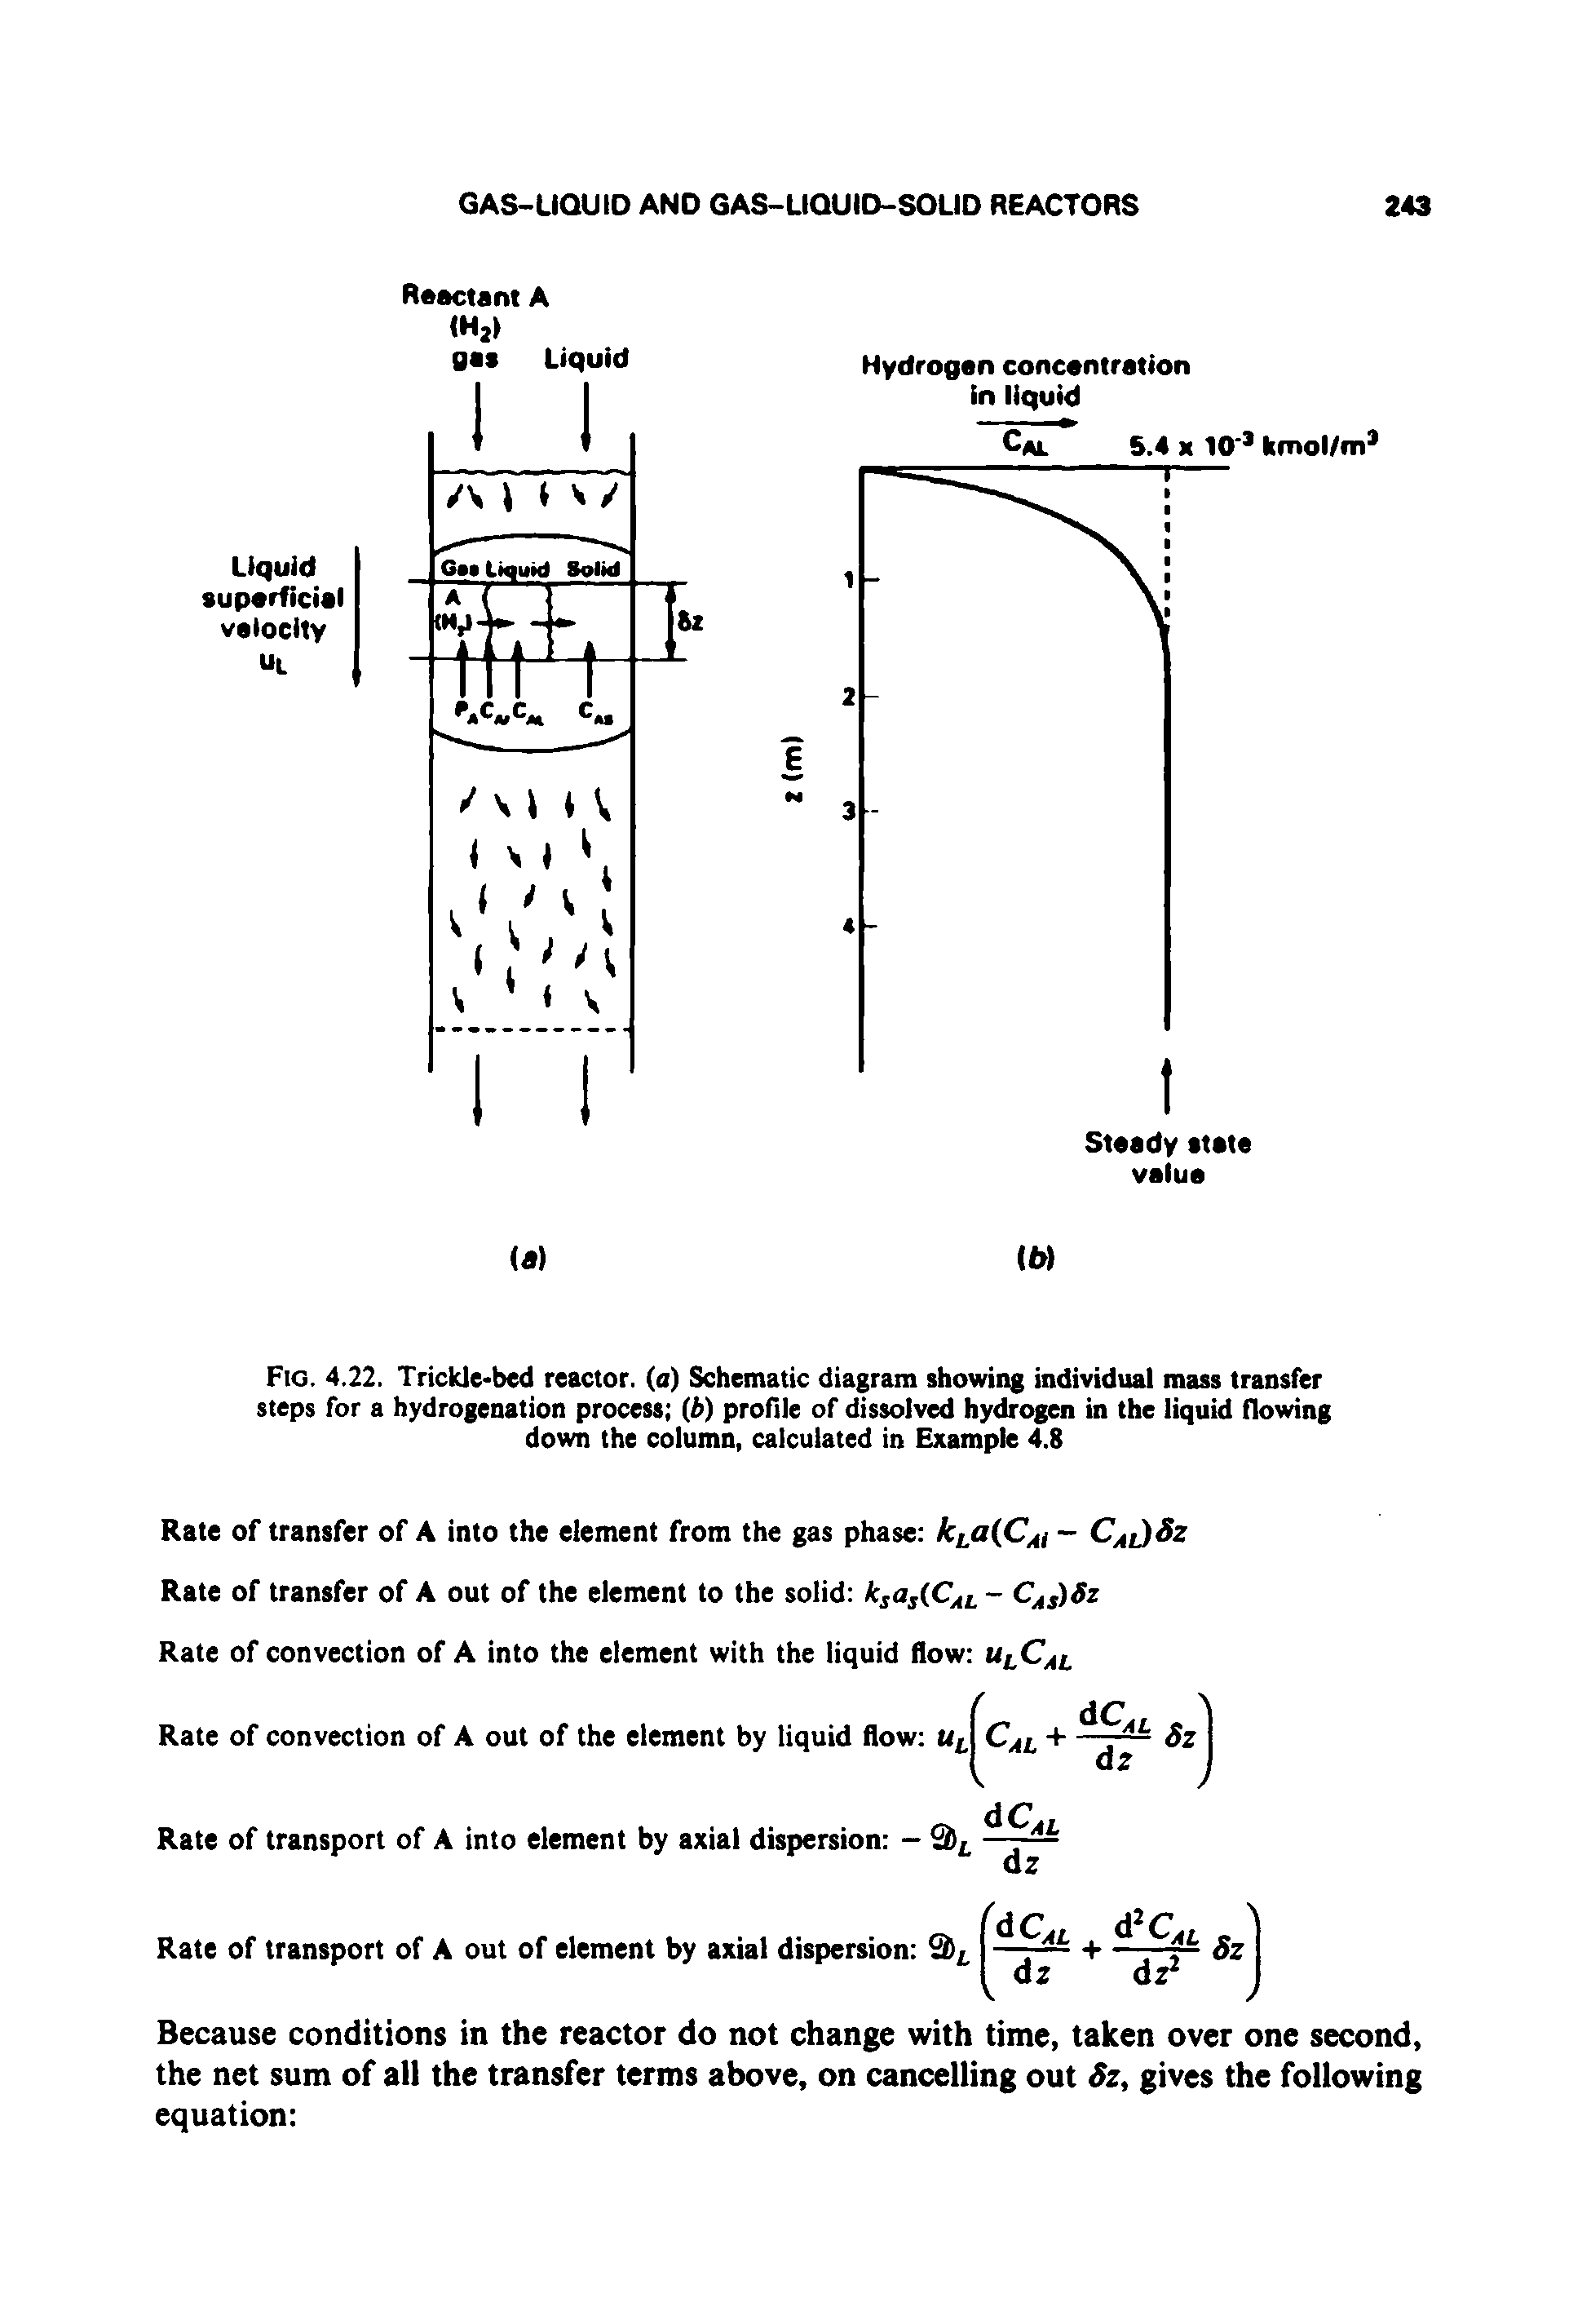 Fig. 4.22. Trickle-bed reactor, (a) Schematic diagram showing individual mass transfer steps for a hydrogenation process (b) profile of dissolved hydrogen in the liquid flowing down the column, calculated in Example 4.8...